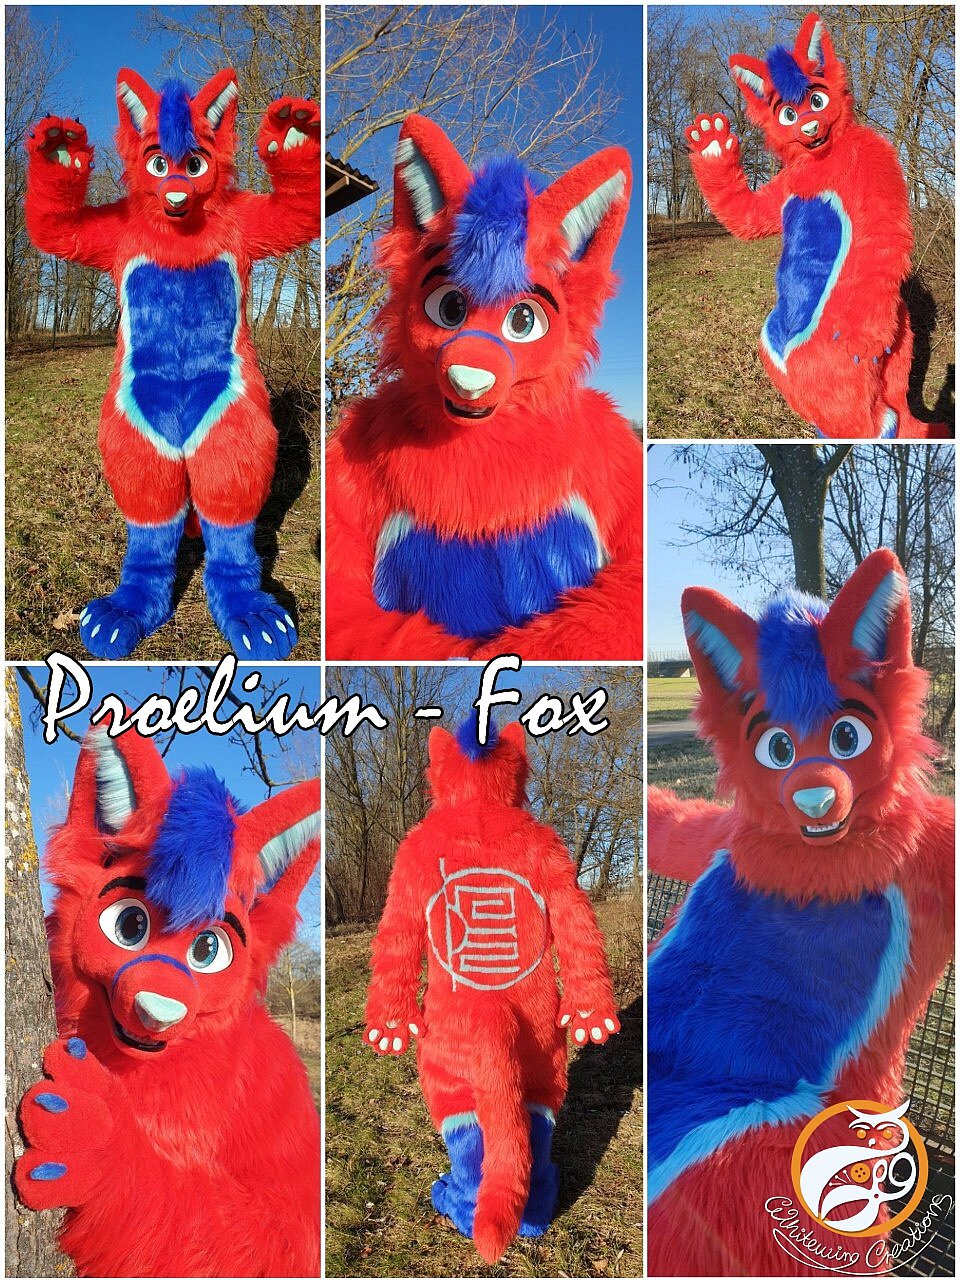 Proelium - Full Fursuit made by WhitewingCreations - Fursuits made in Germany